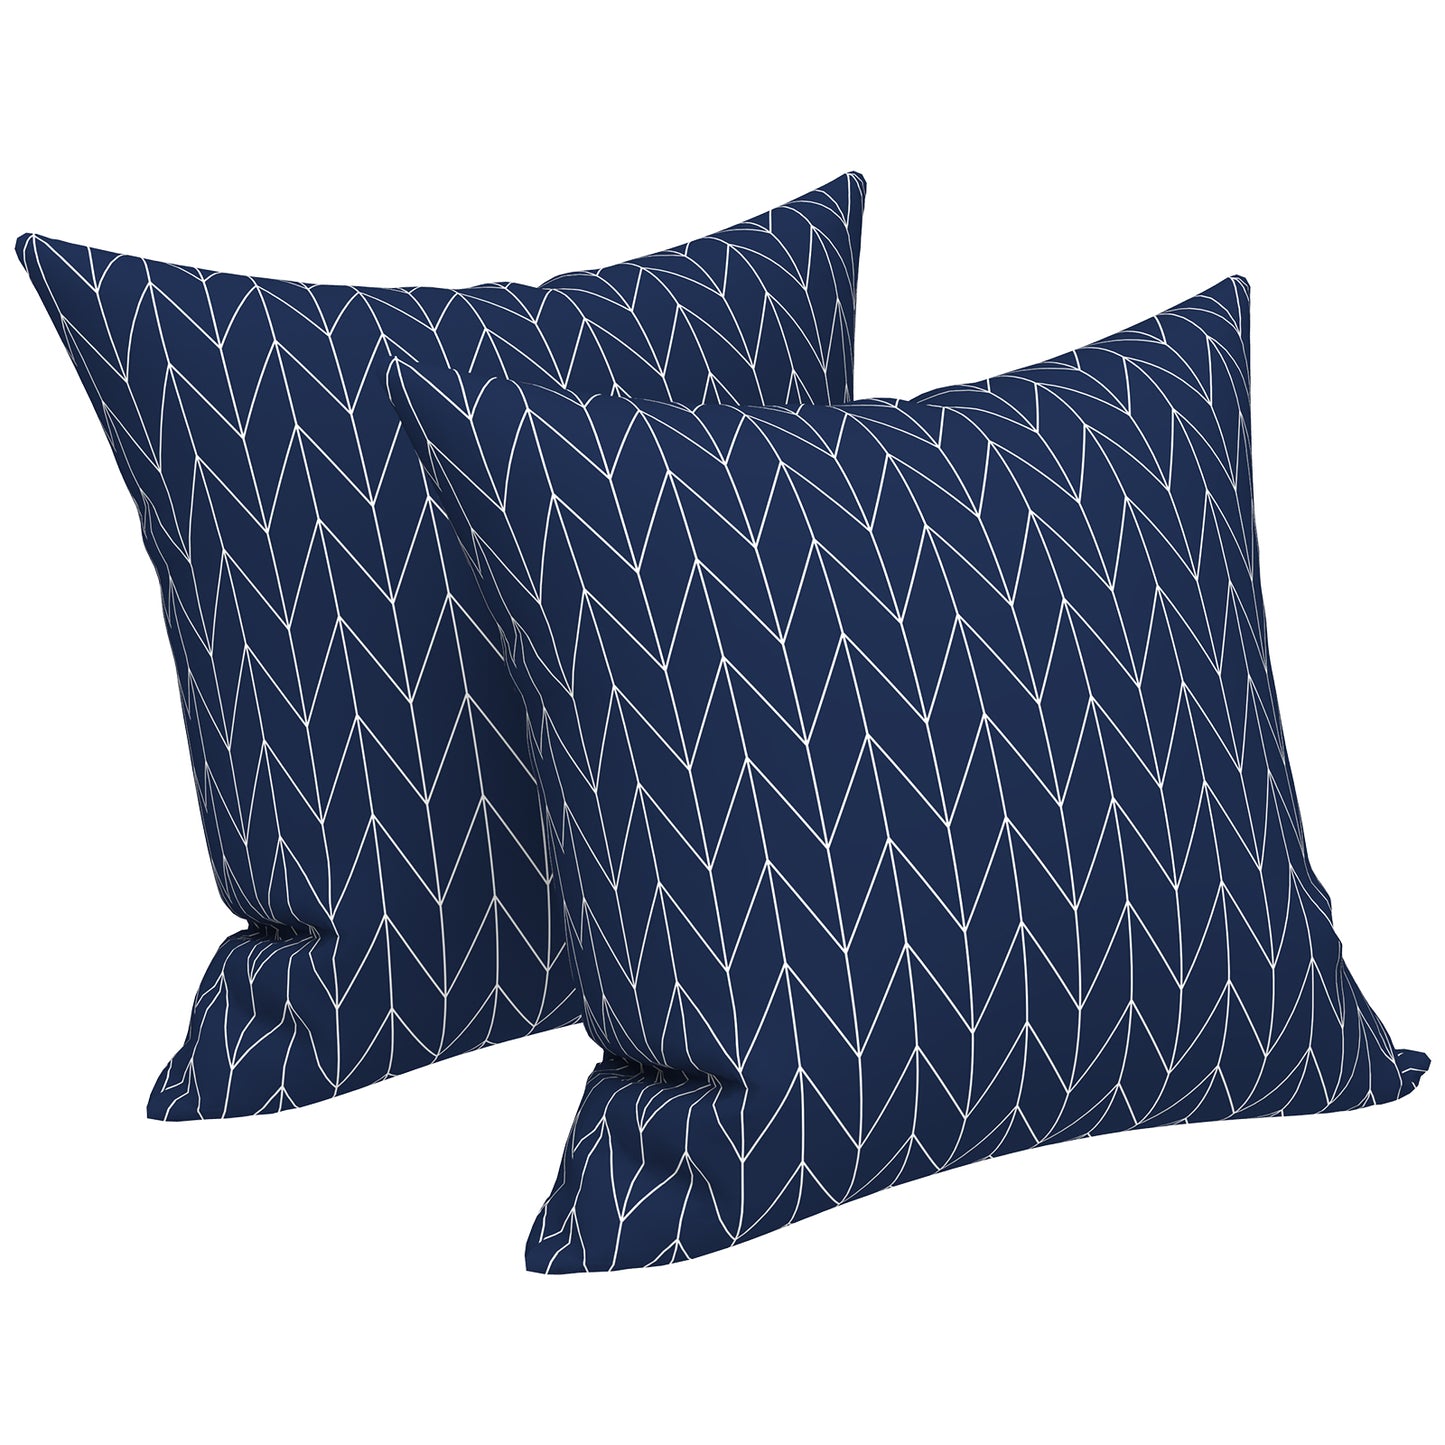 Melody Elephant Outdoor Throw Pillow Covers Pack of 2, Decorative Water Repellent Square Pillow Cases 18x18 Inch, Patio Pillowcases for Home Patio Furniture Use, Herringbone Navy